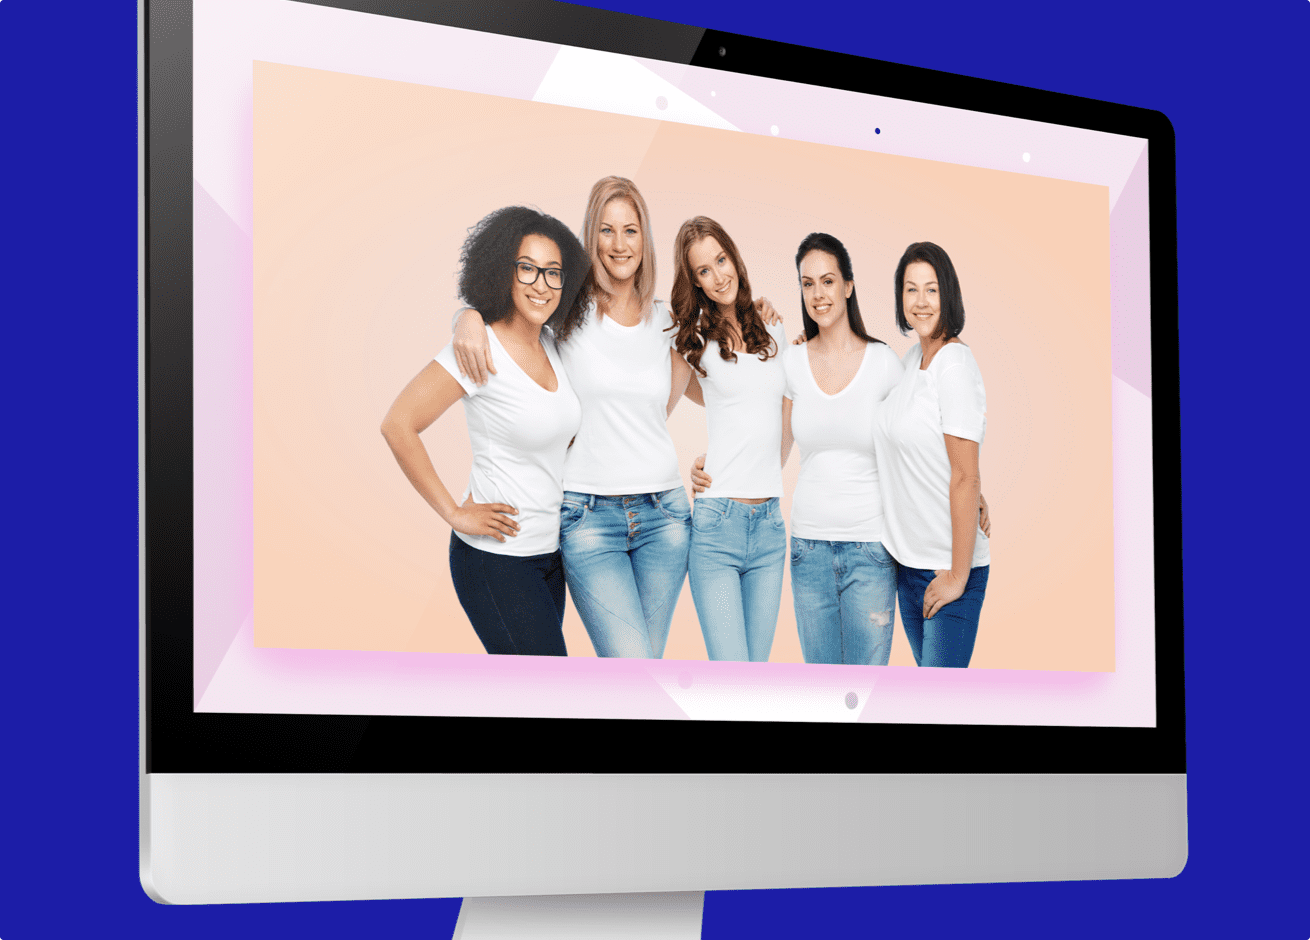 Women posing on an apparel company's website shown on a monitor